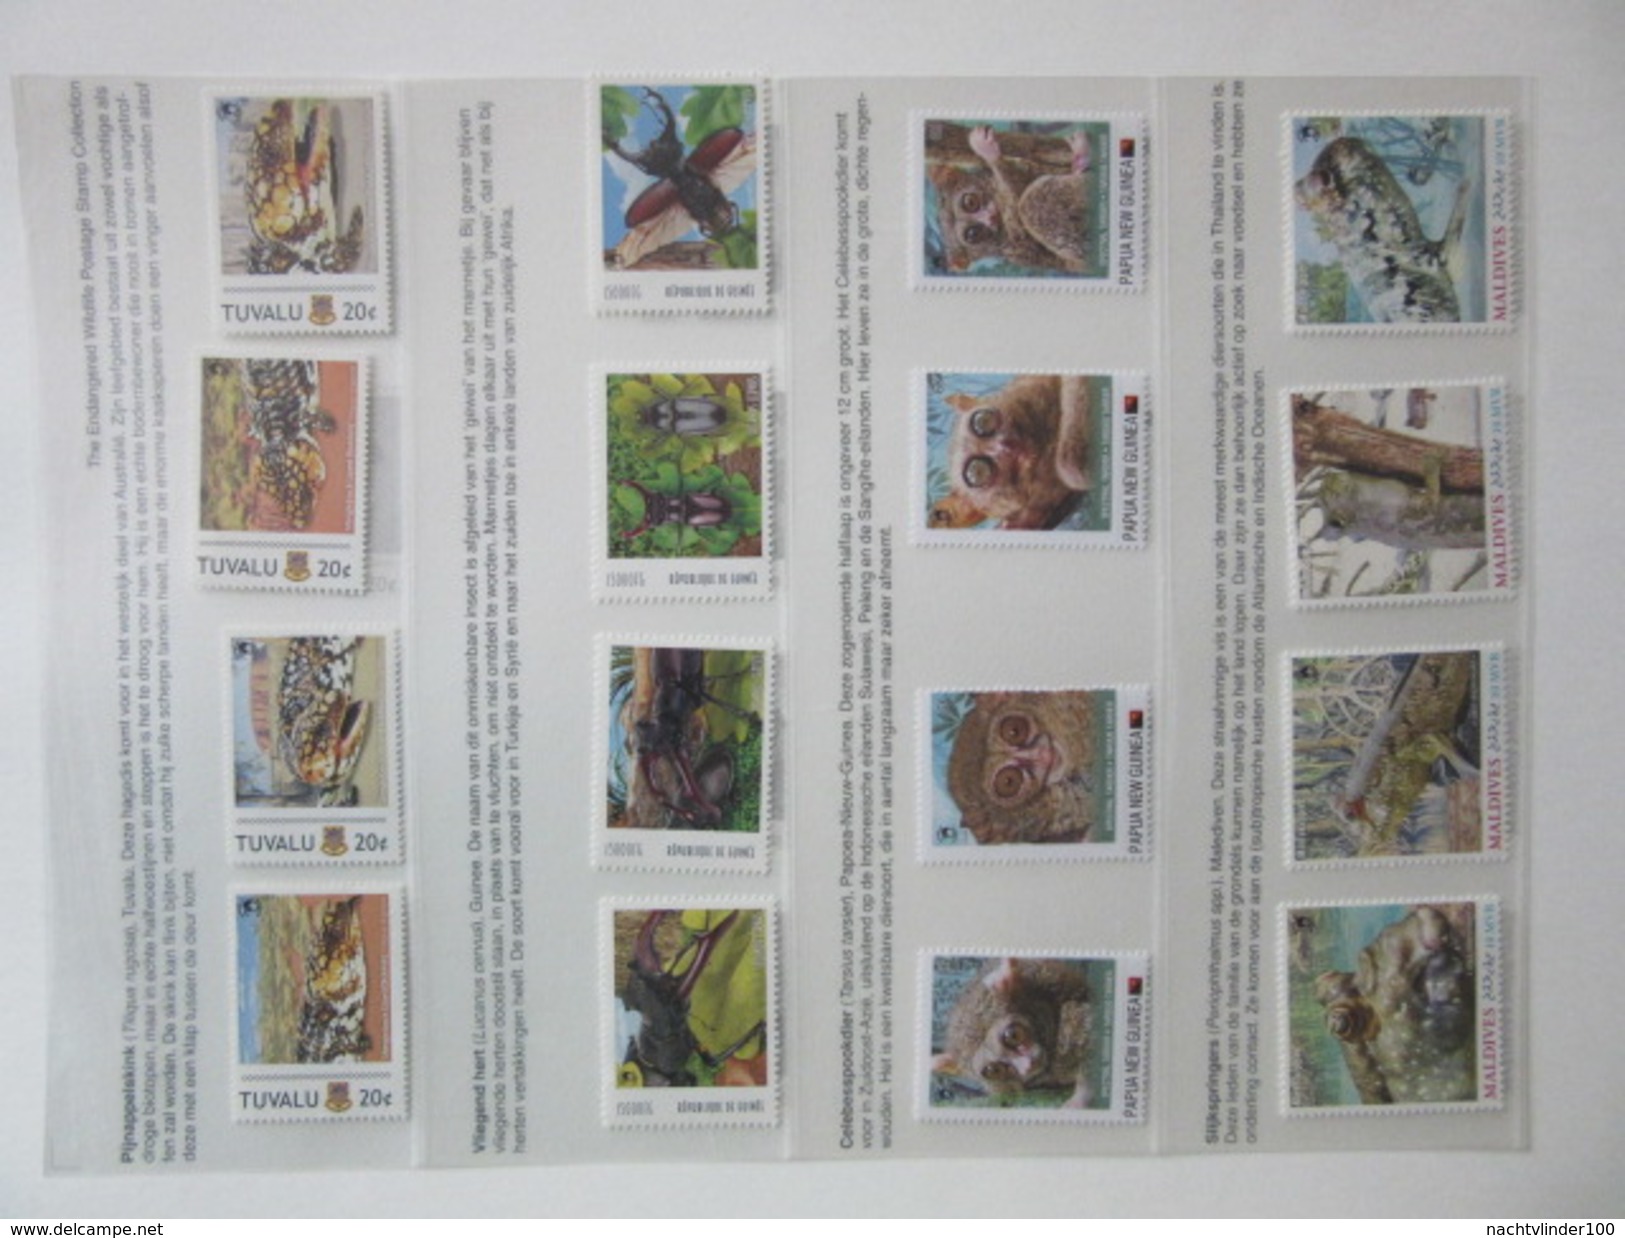 FAUNA 375 sets of WWF AND ENDANGERED WILDLIFE COLLECTION IN 3 NICE ALBUMS ! Ndw PF/MNH